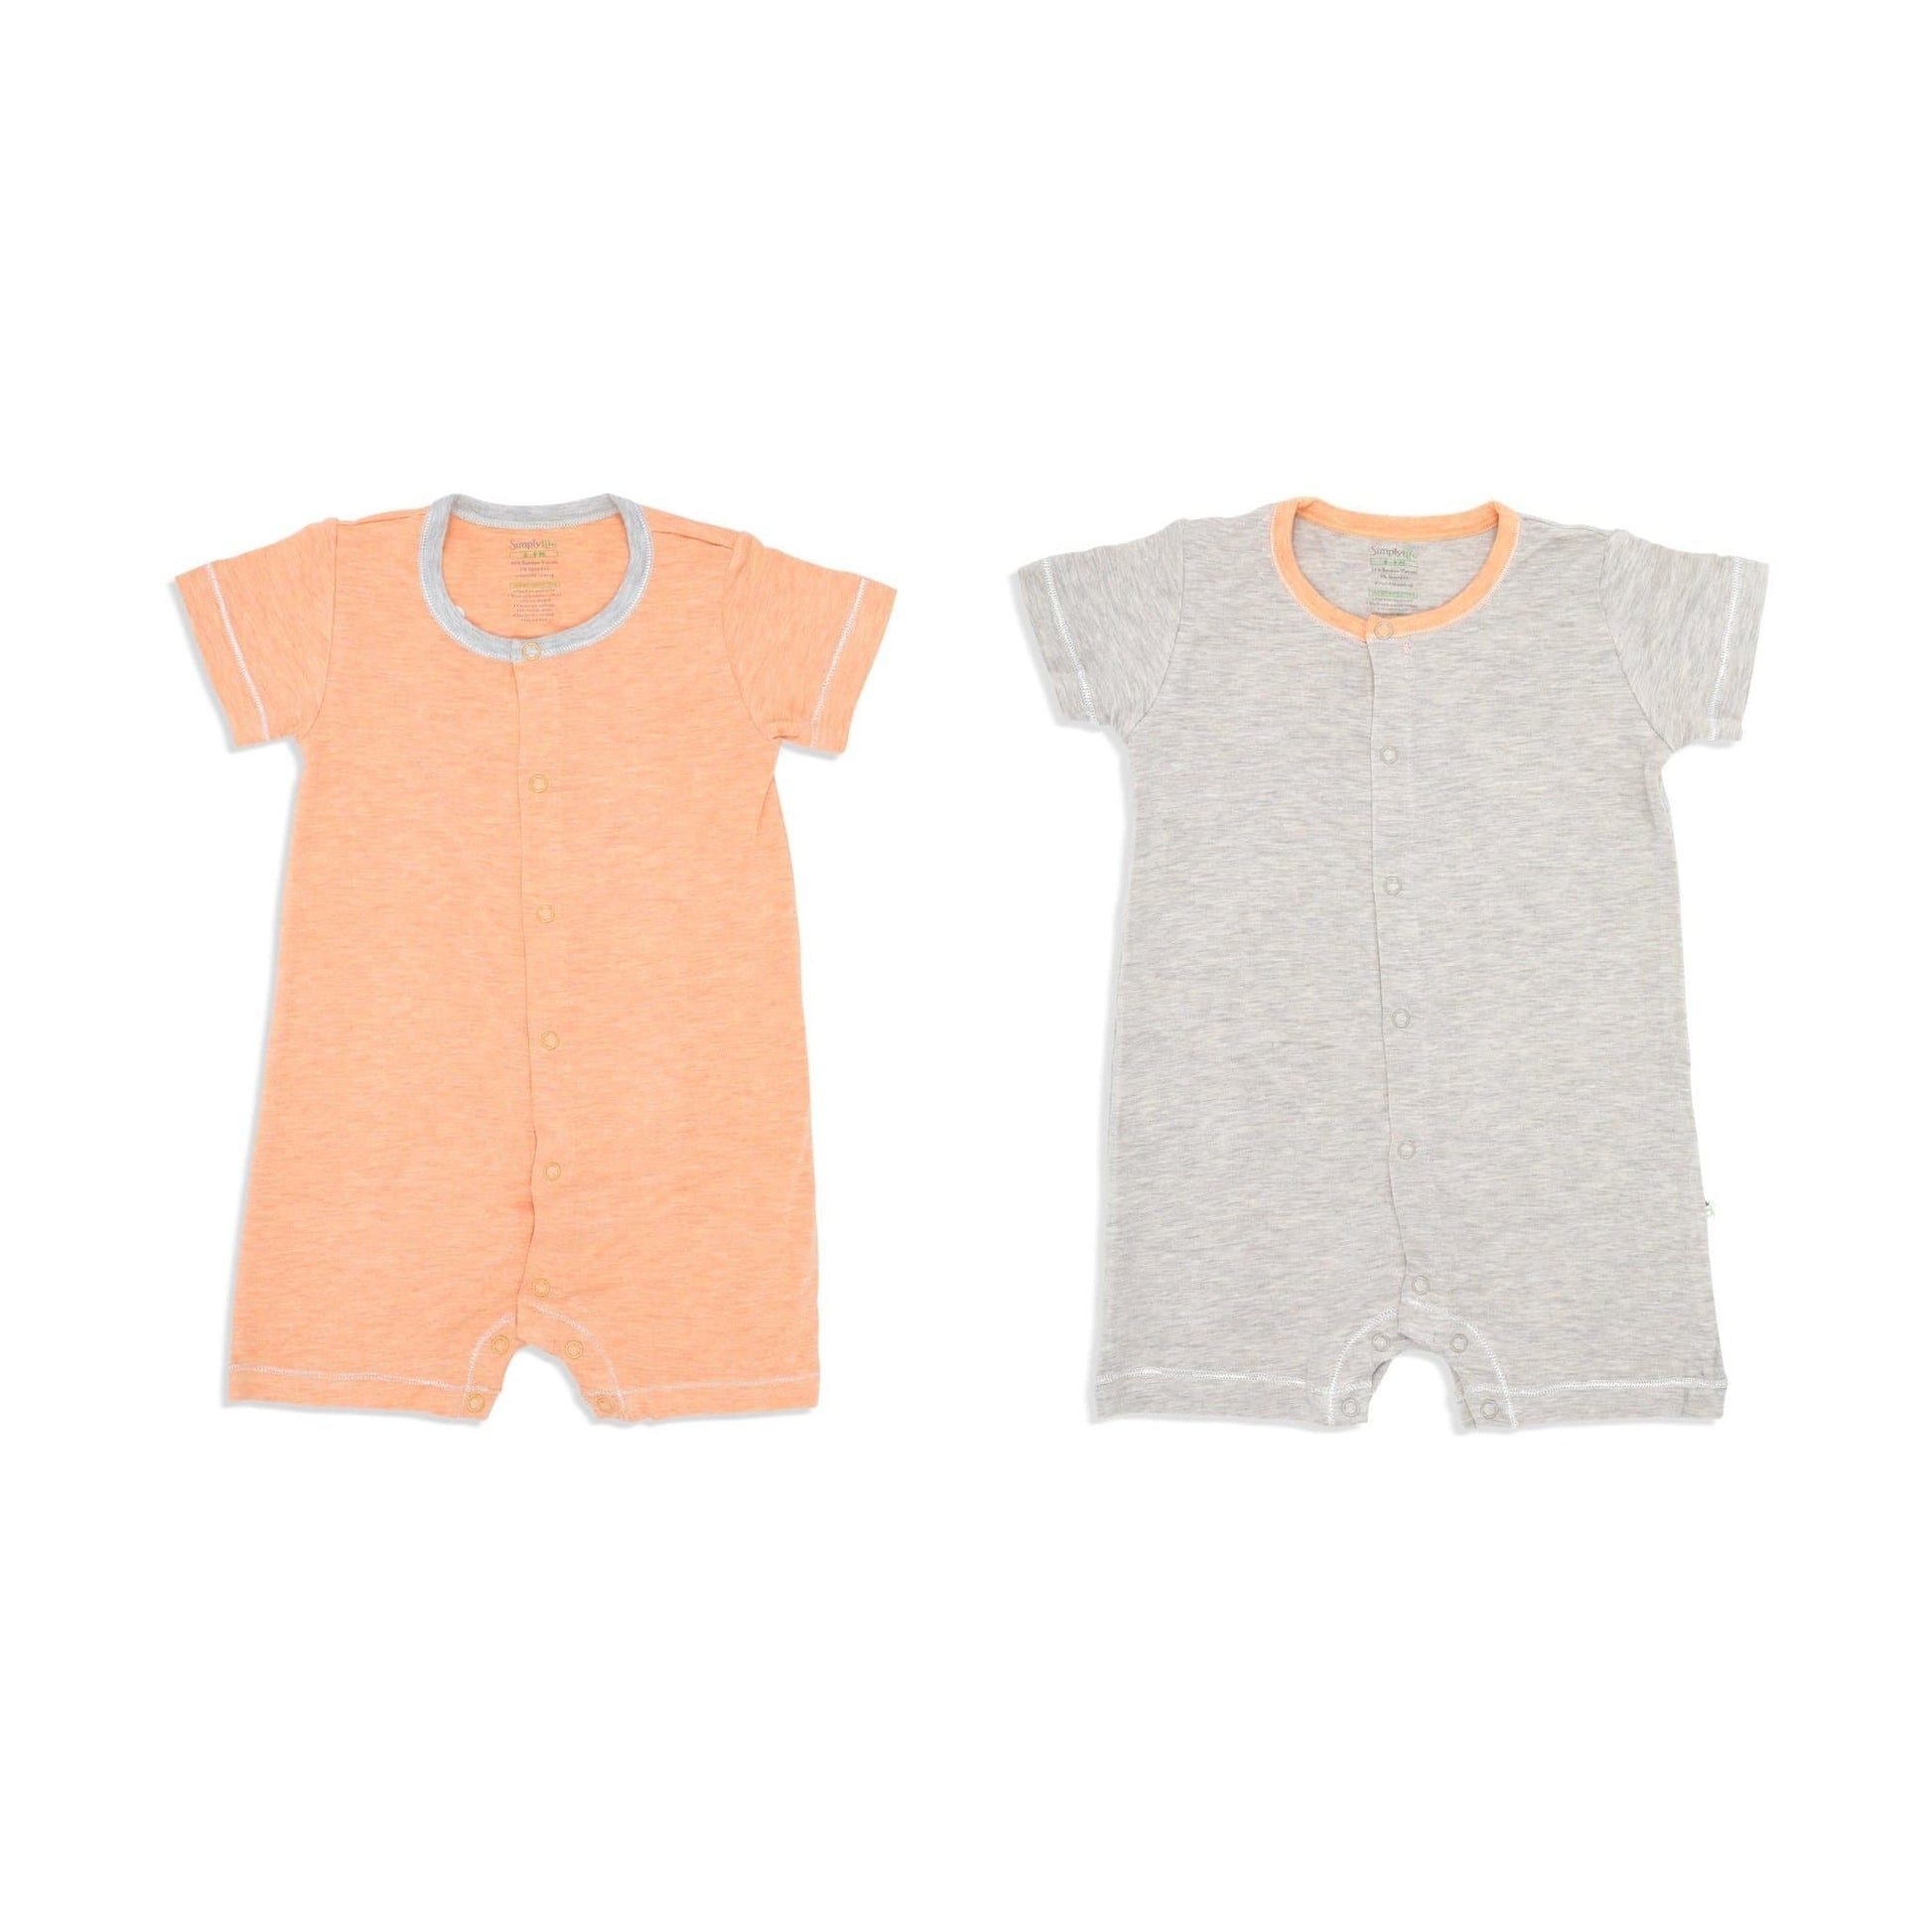 Sandwash Orange and Khaki - Short-sleeved Shortall with Front Buttons (Value Pack of 2) - Simply Life